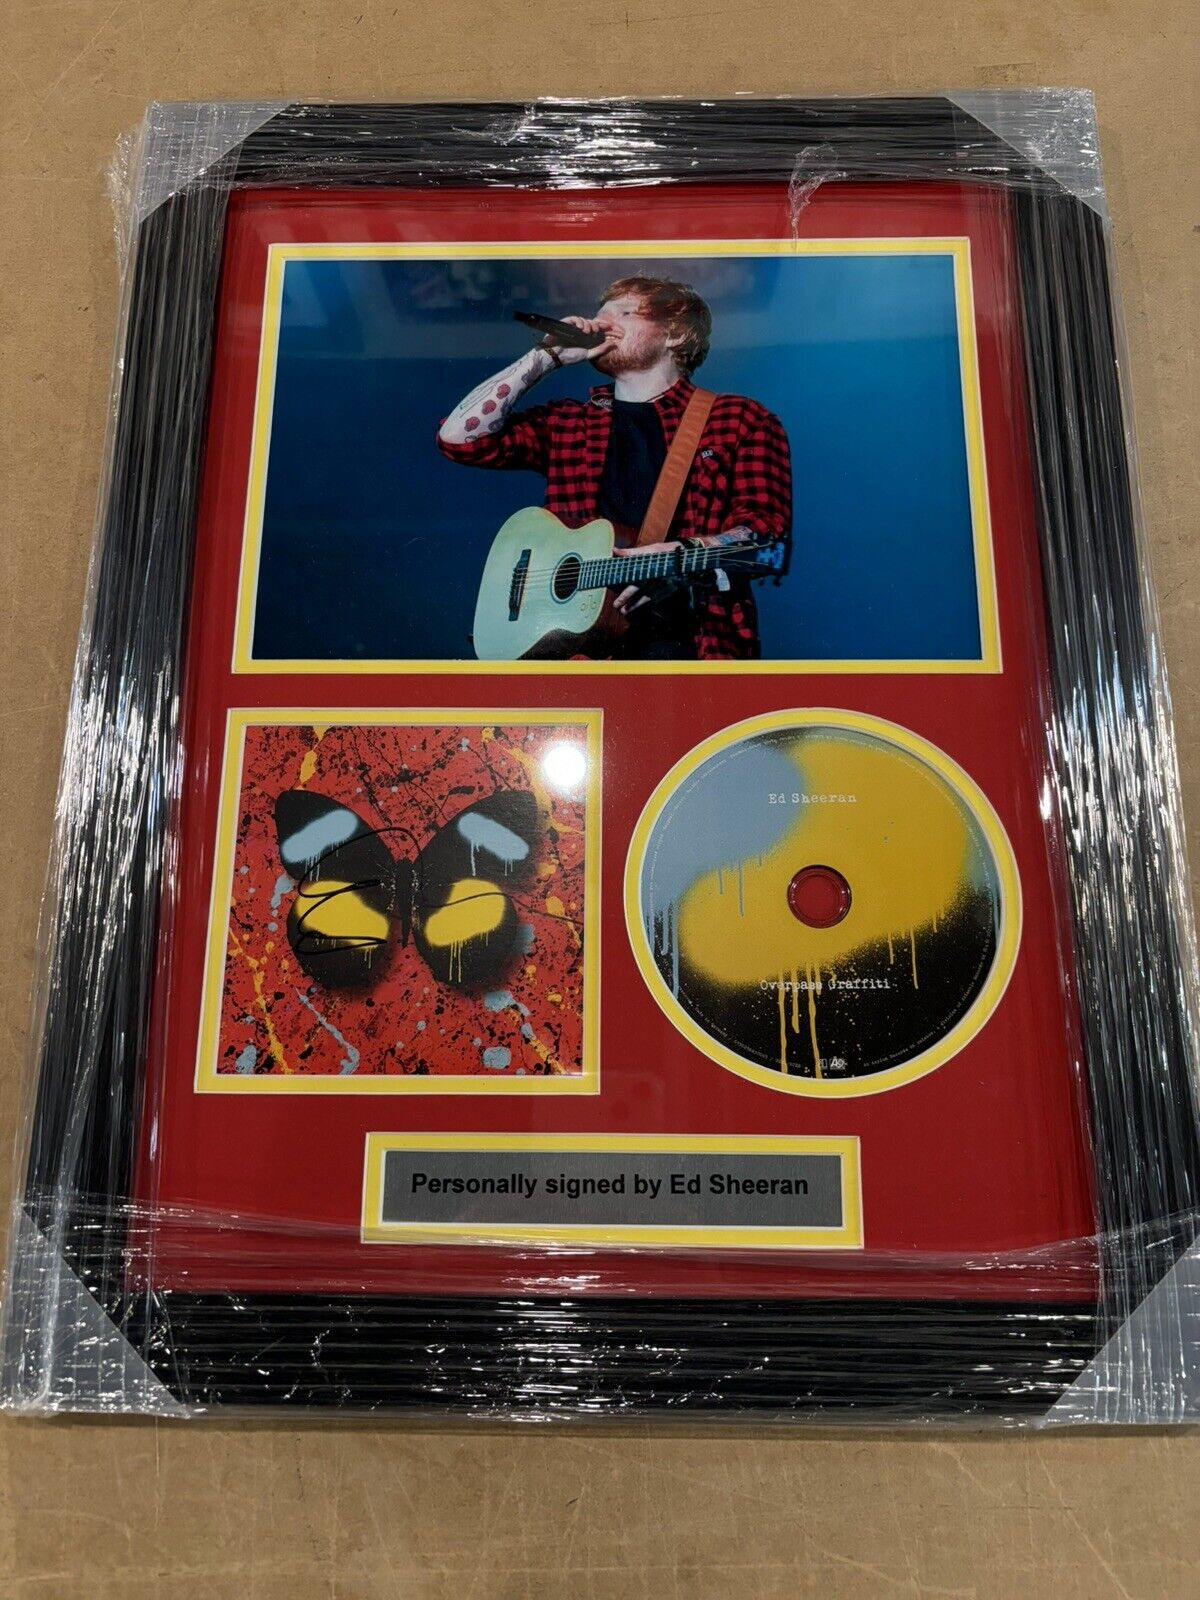 Ed Sheeran Signed CD Album Cover  with CD - Framed - Brand New